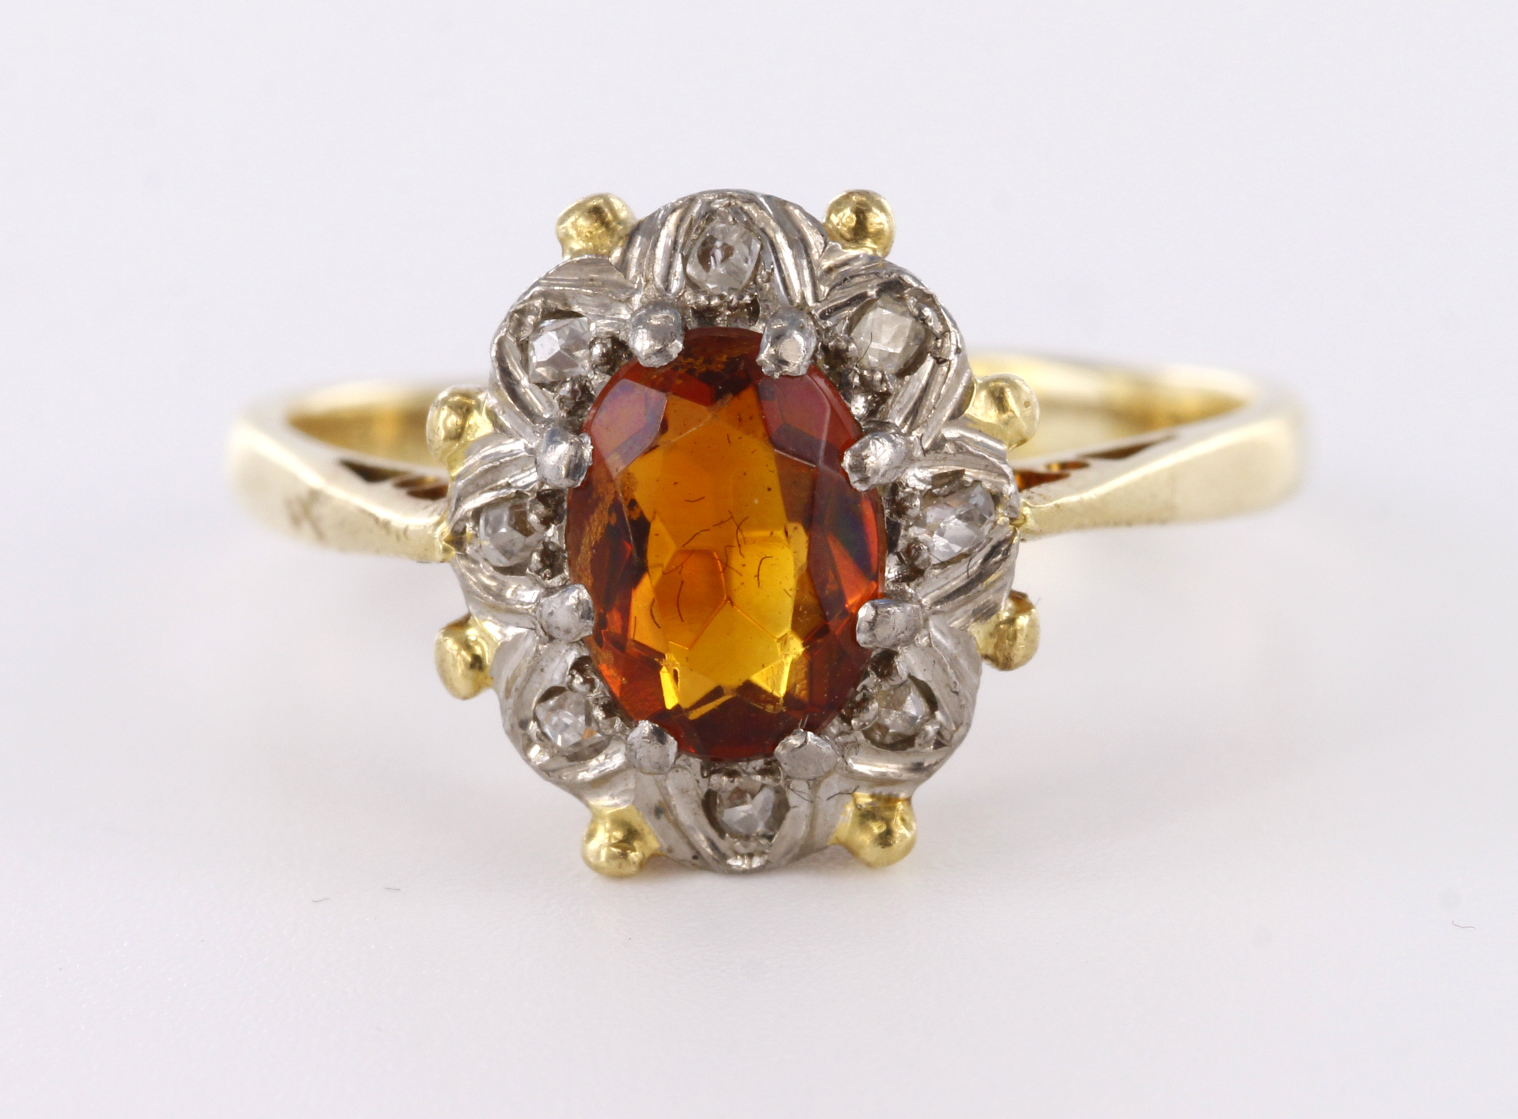 9ct yellow gold cluster ring set with central oval topaz with diamond accent surround, finger size